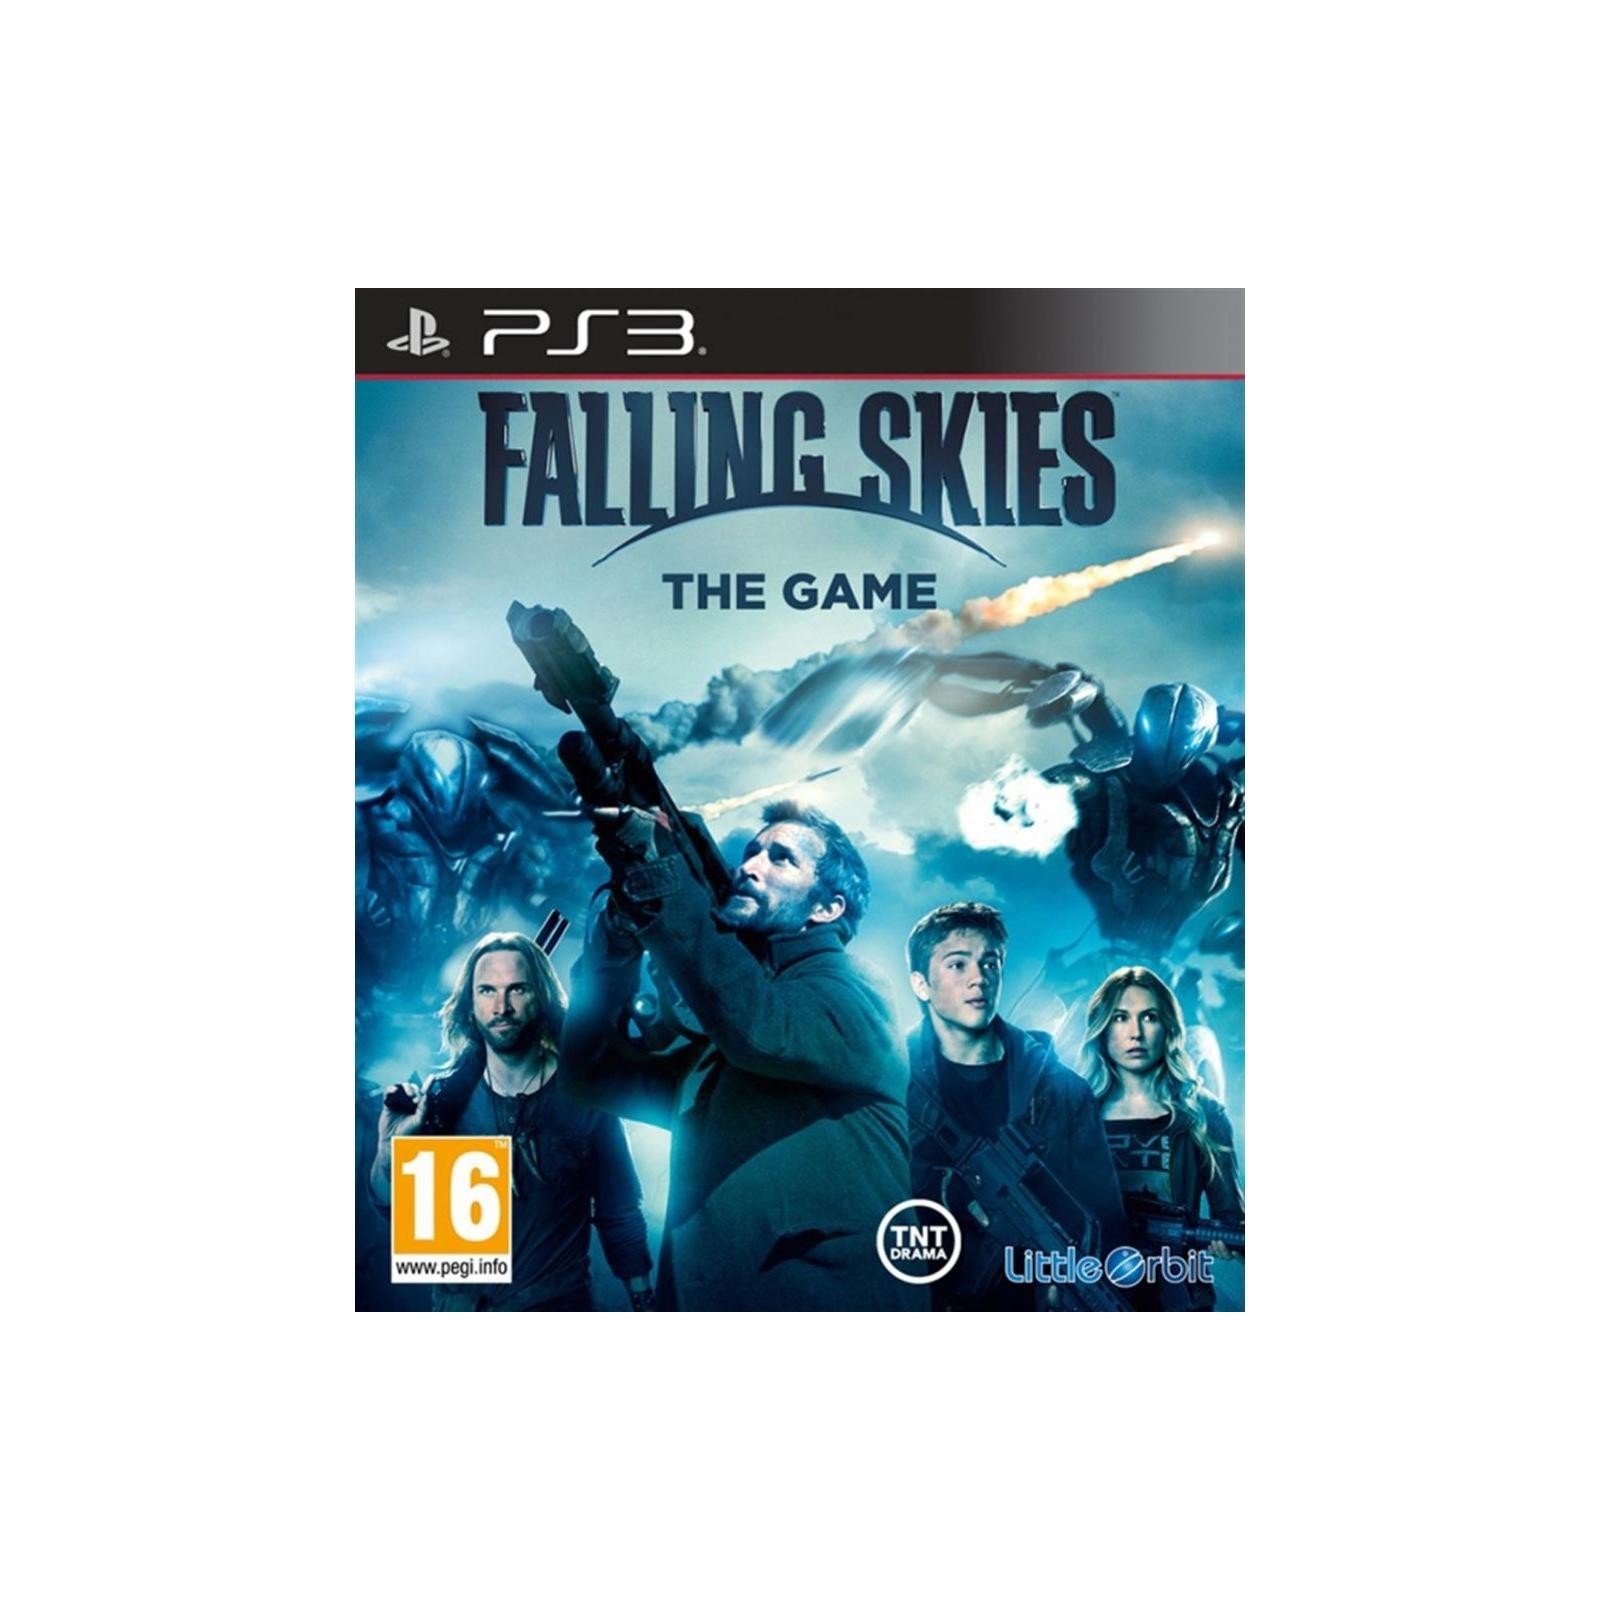 Falling Skies: The Game Ps3